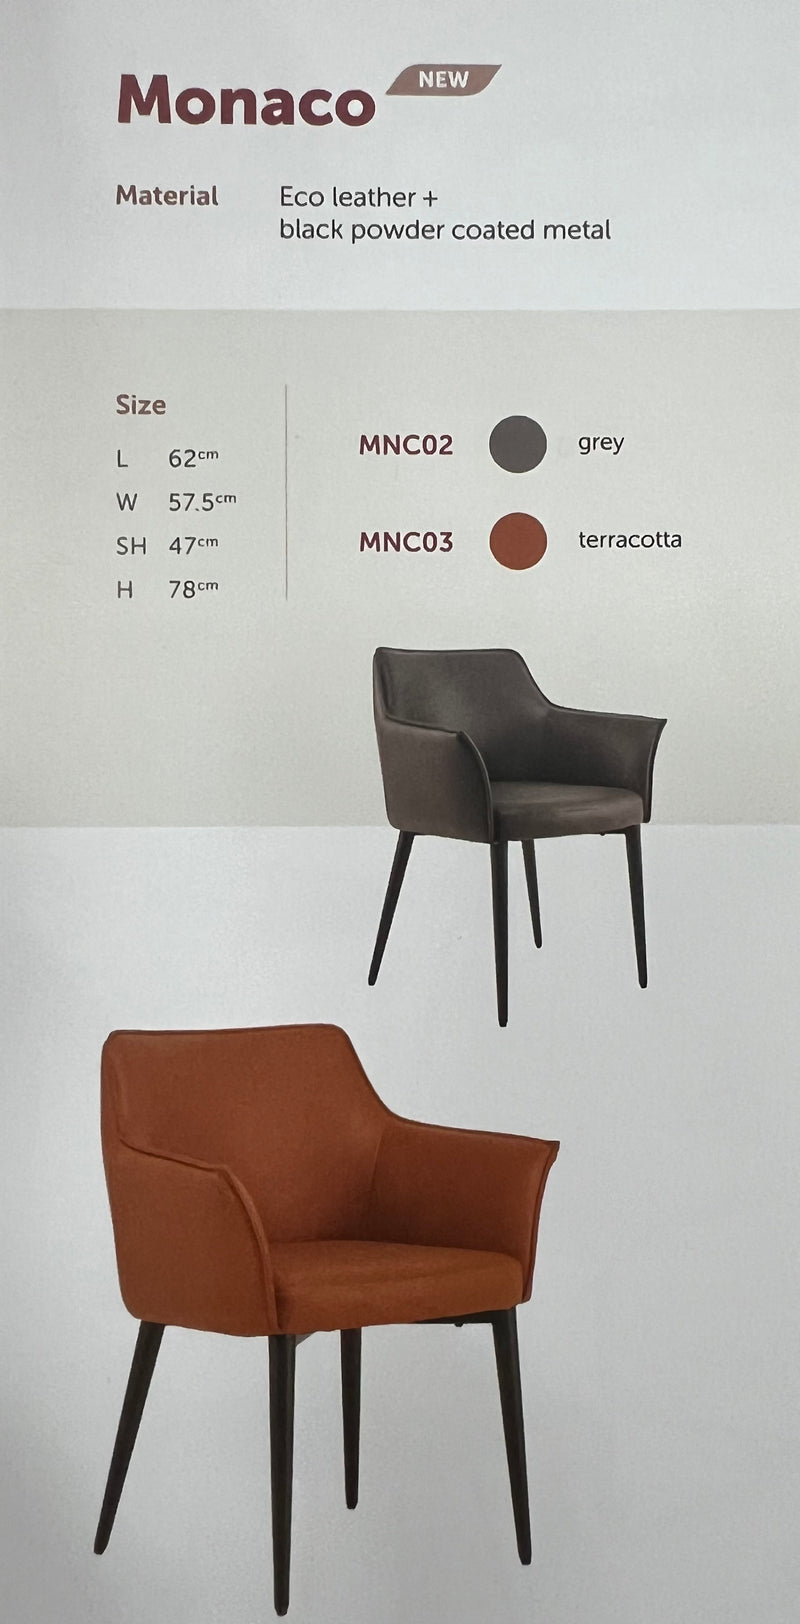 Monaco Dining Chair - Full House Furniture